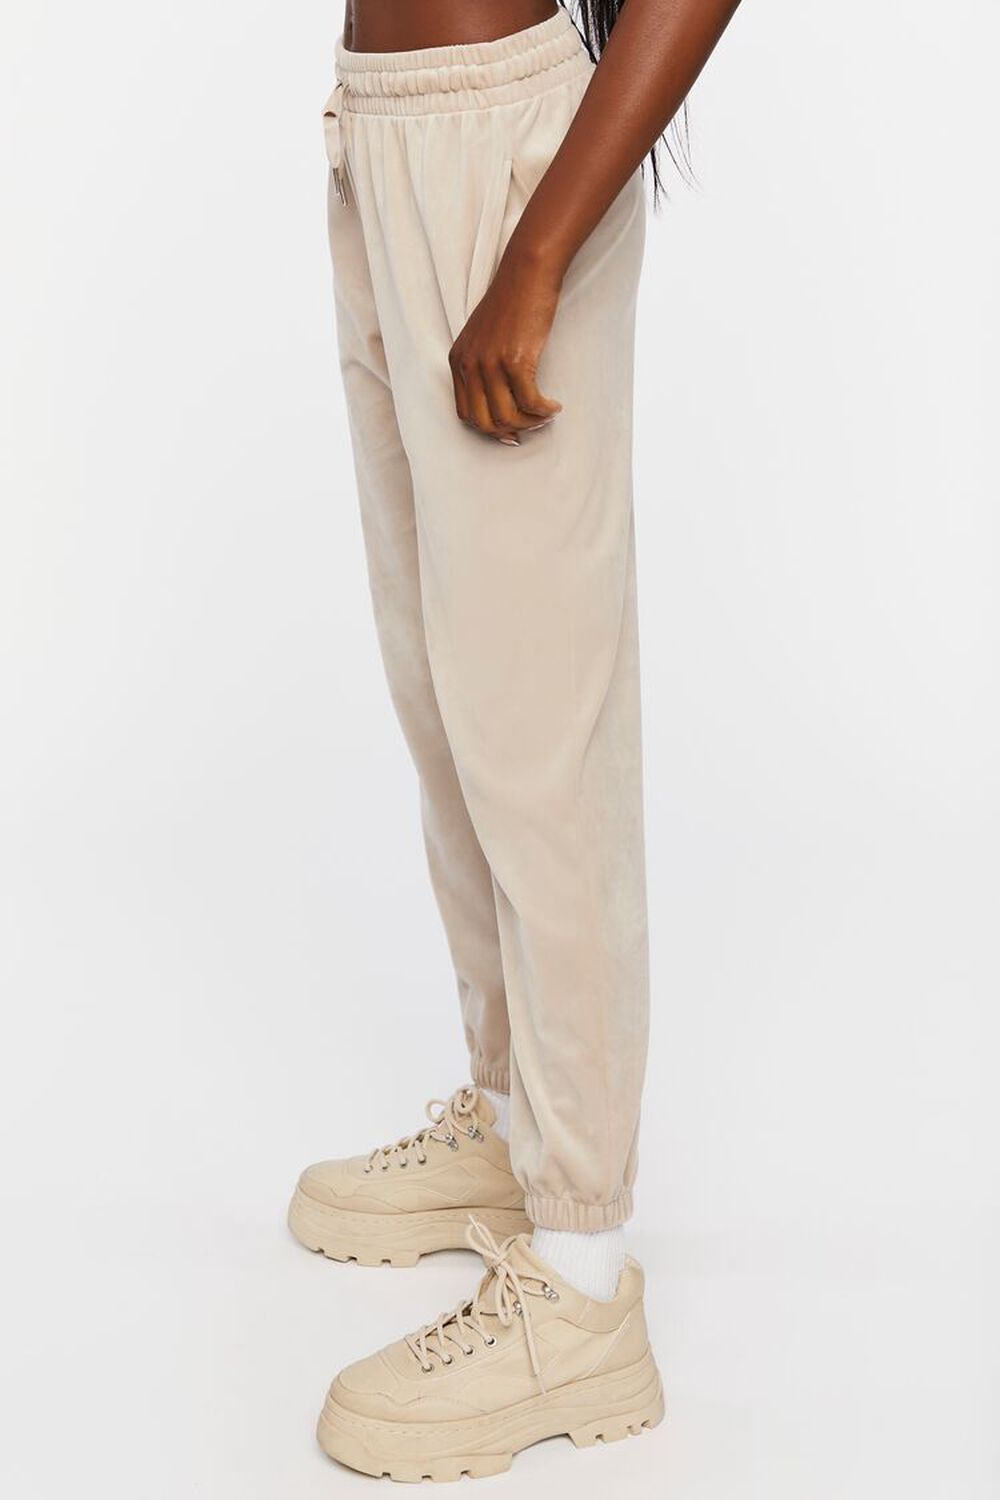 OYSTER GREY Velour Drawstring Joggers, image 3